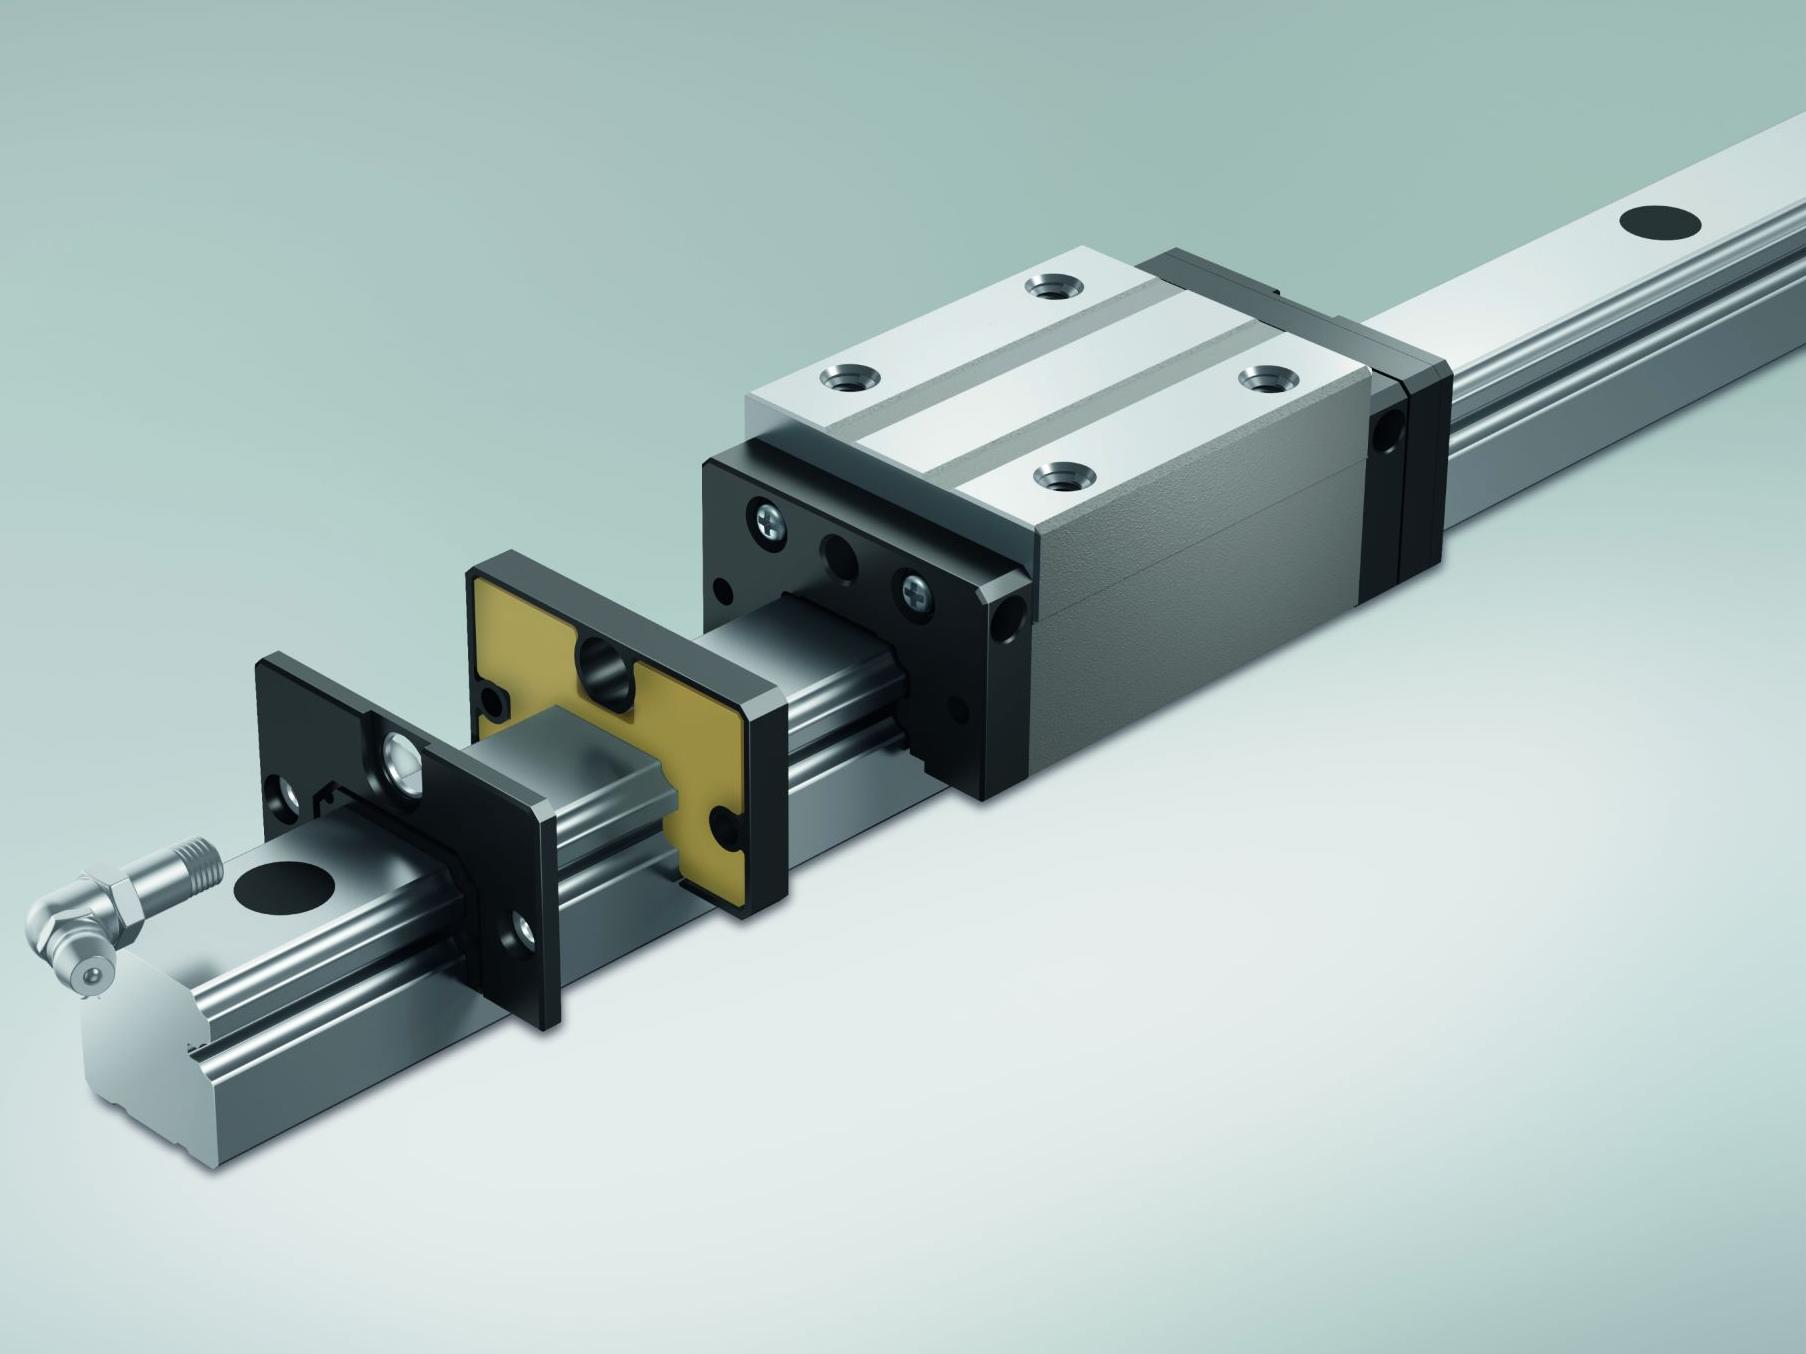 Replacement linear guides give rise to savings at bakery 